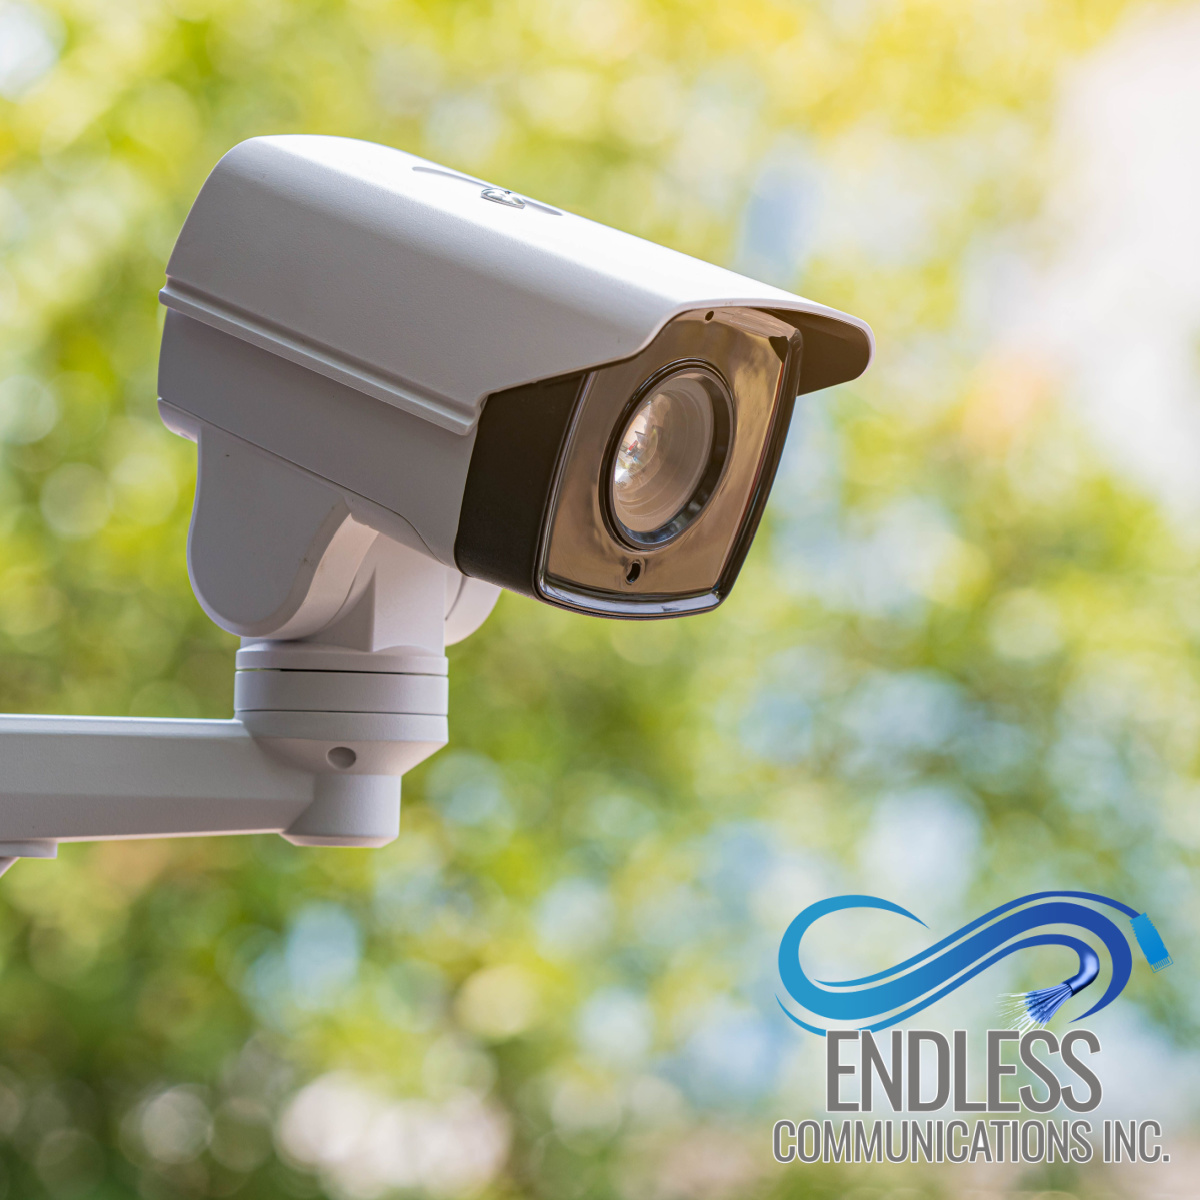 Secure Your Business with Endless Communications' Security Camera Repair Service in Tustin